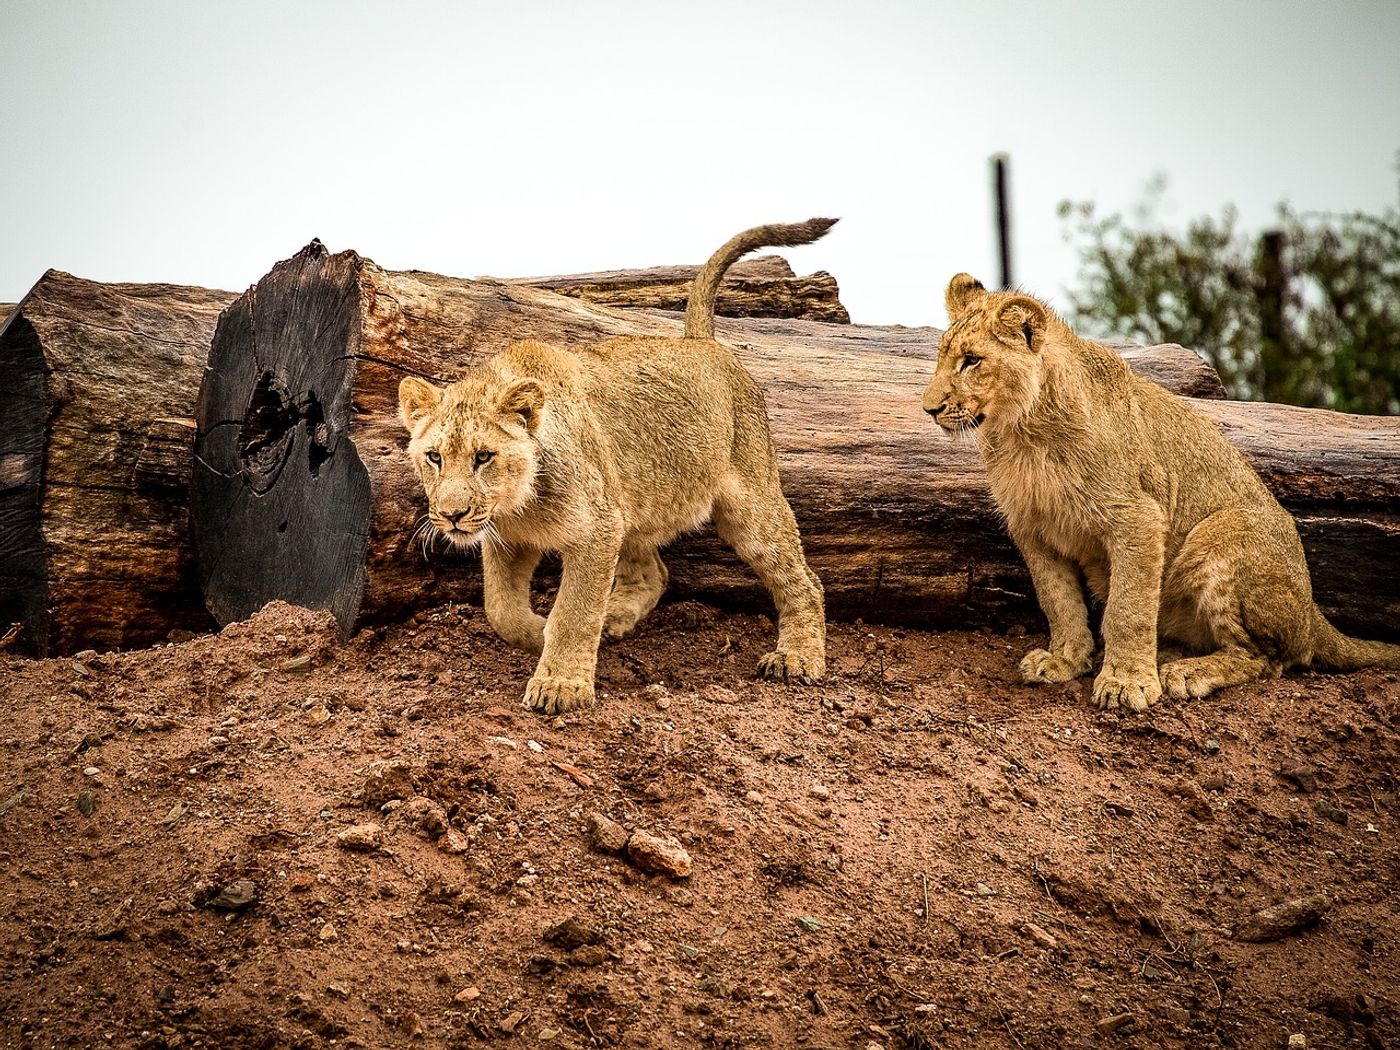 Lions are often hunted illegally in South Africa for their valuable bones and pelts.